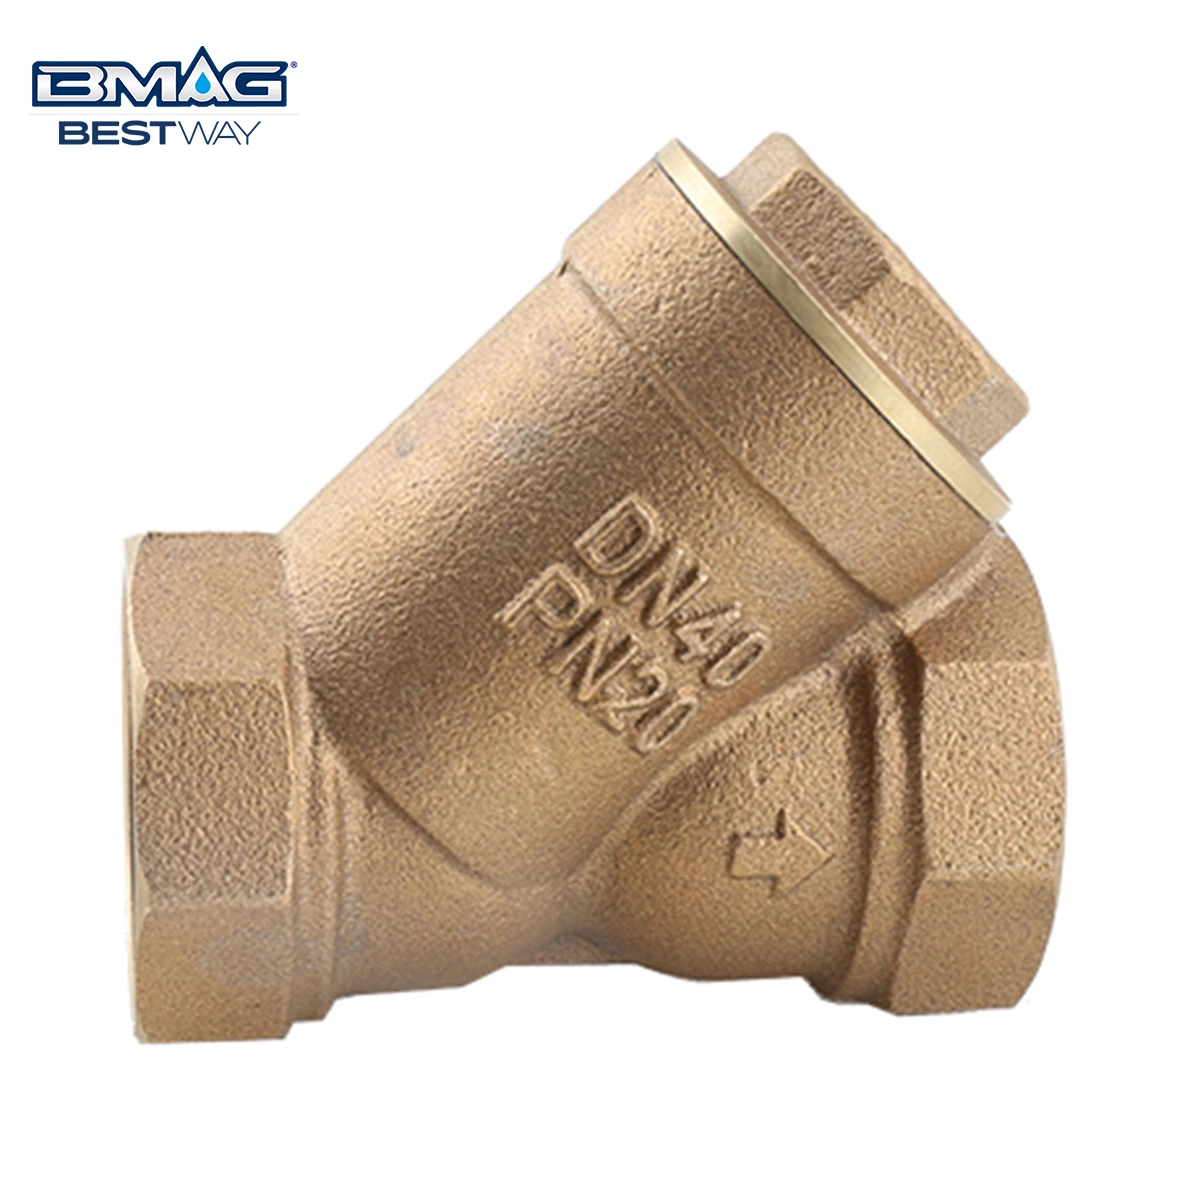 Bmag Bronze Y Type Strainer Valve with Stainless Steel Filter